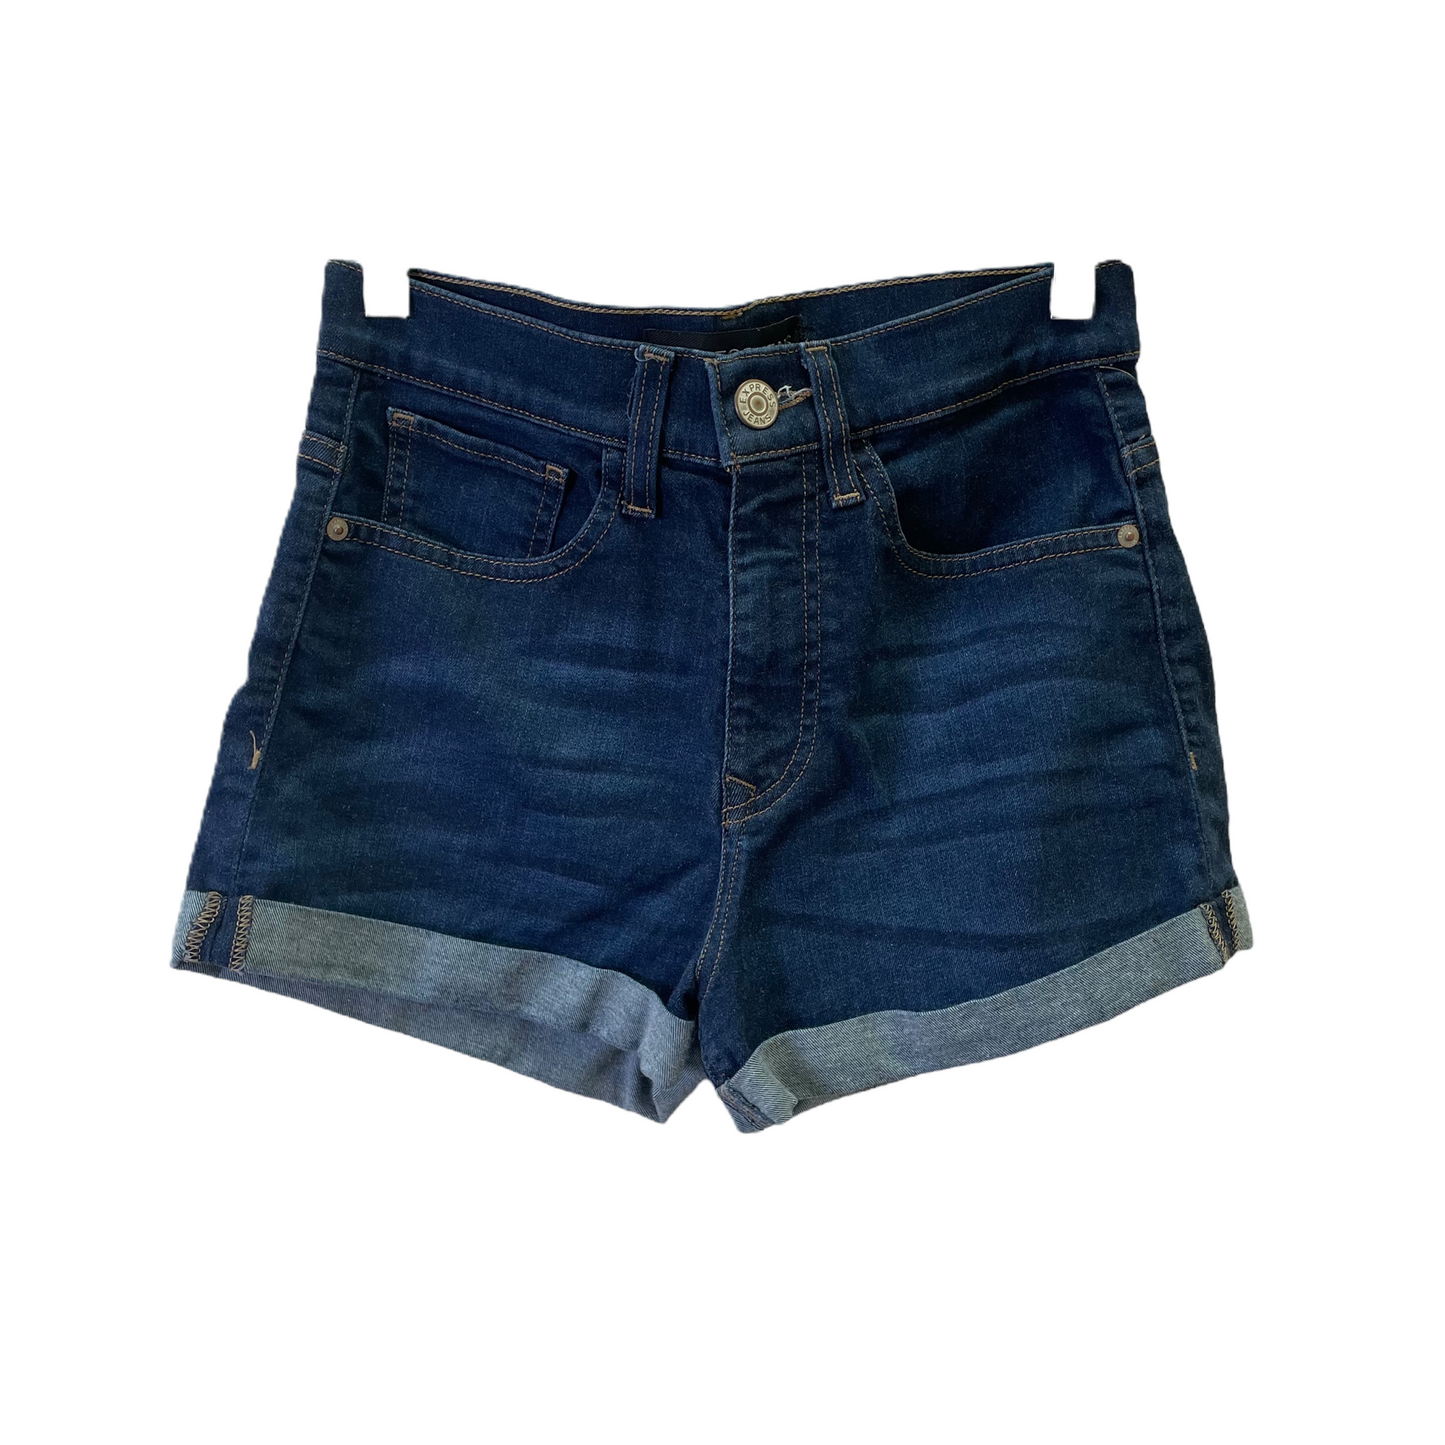 Blue Denim Shorts By Express, Size: 4